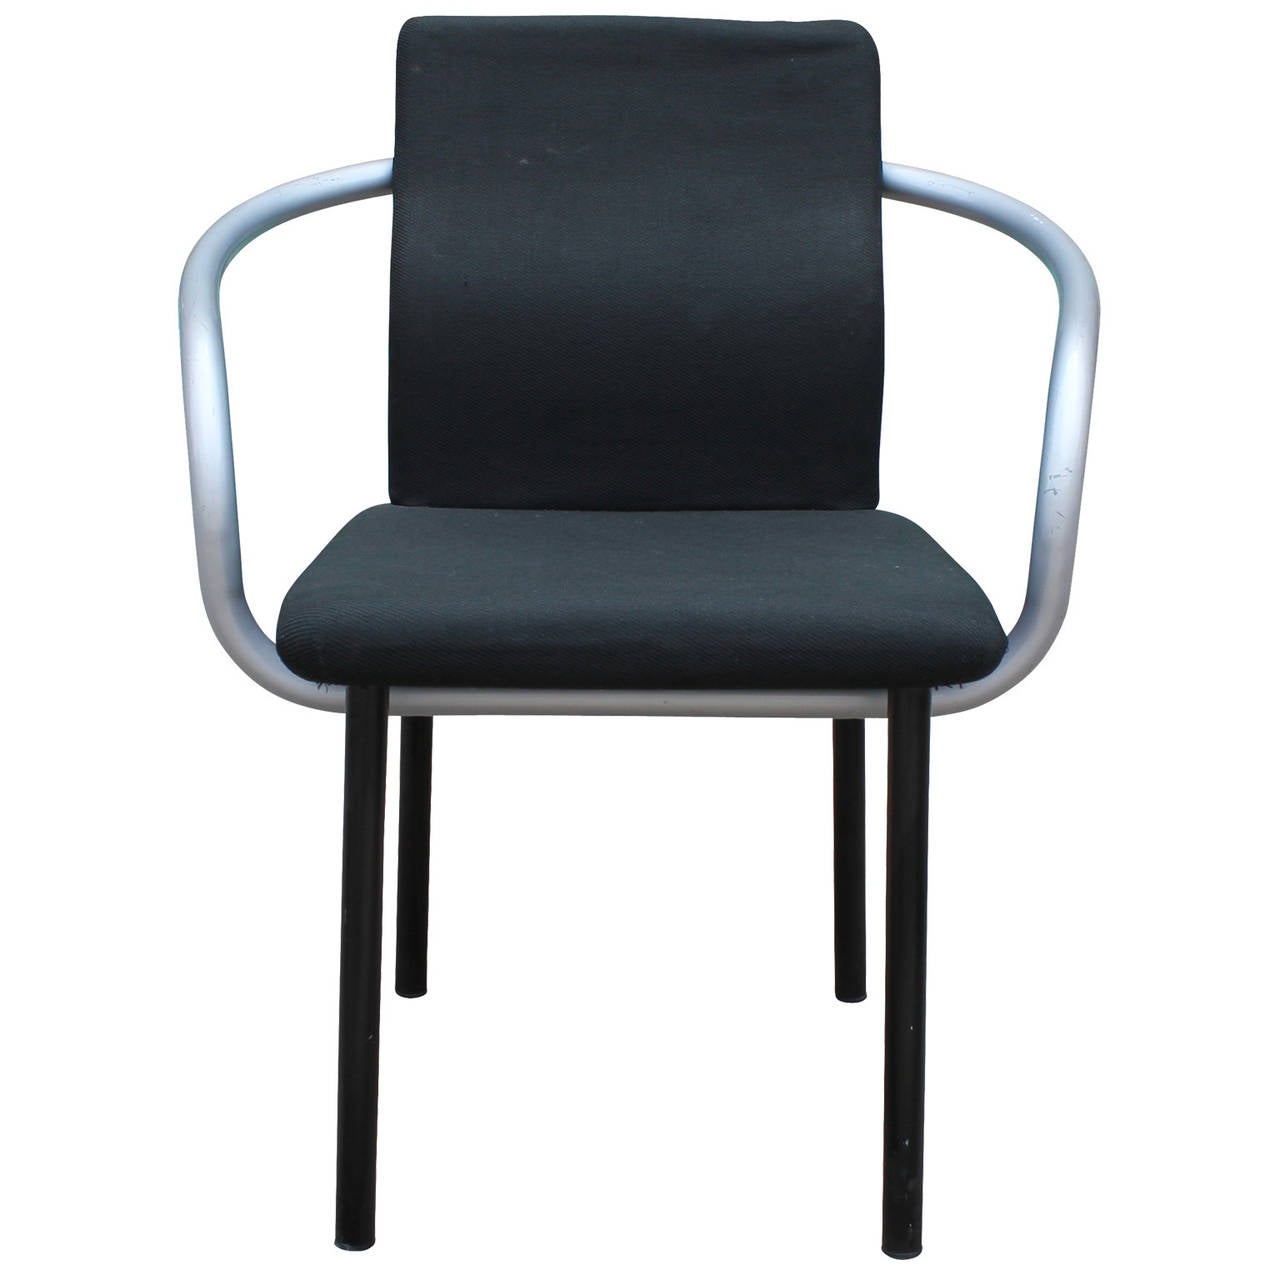 Set of 6 Memphis style Mandarin chairs by Ettore Sottsass. Chair retain original black fabric, but reupholstery is recommended. Black enameled steel frame with undulating steel arms finished in a shimmery silver enamel. Chairs do have some wear to